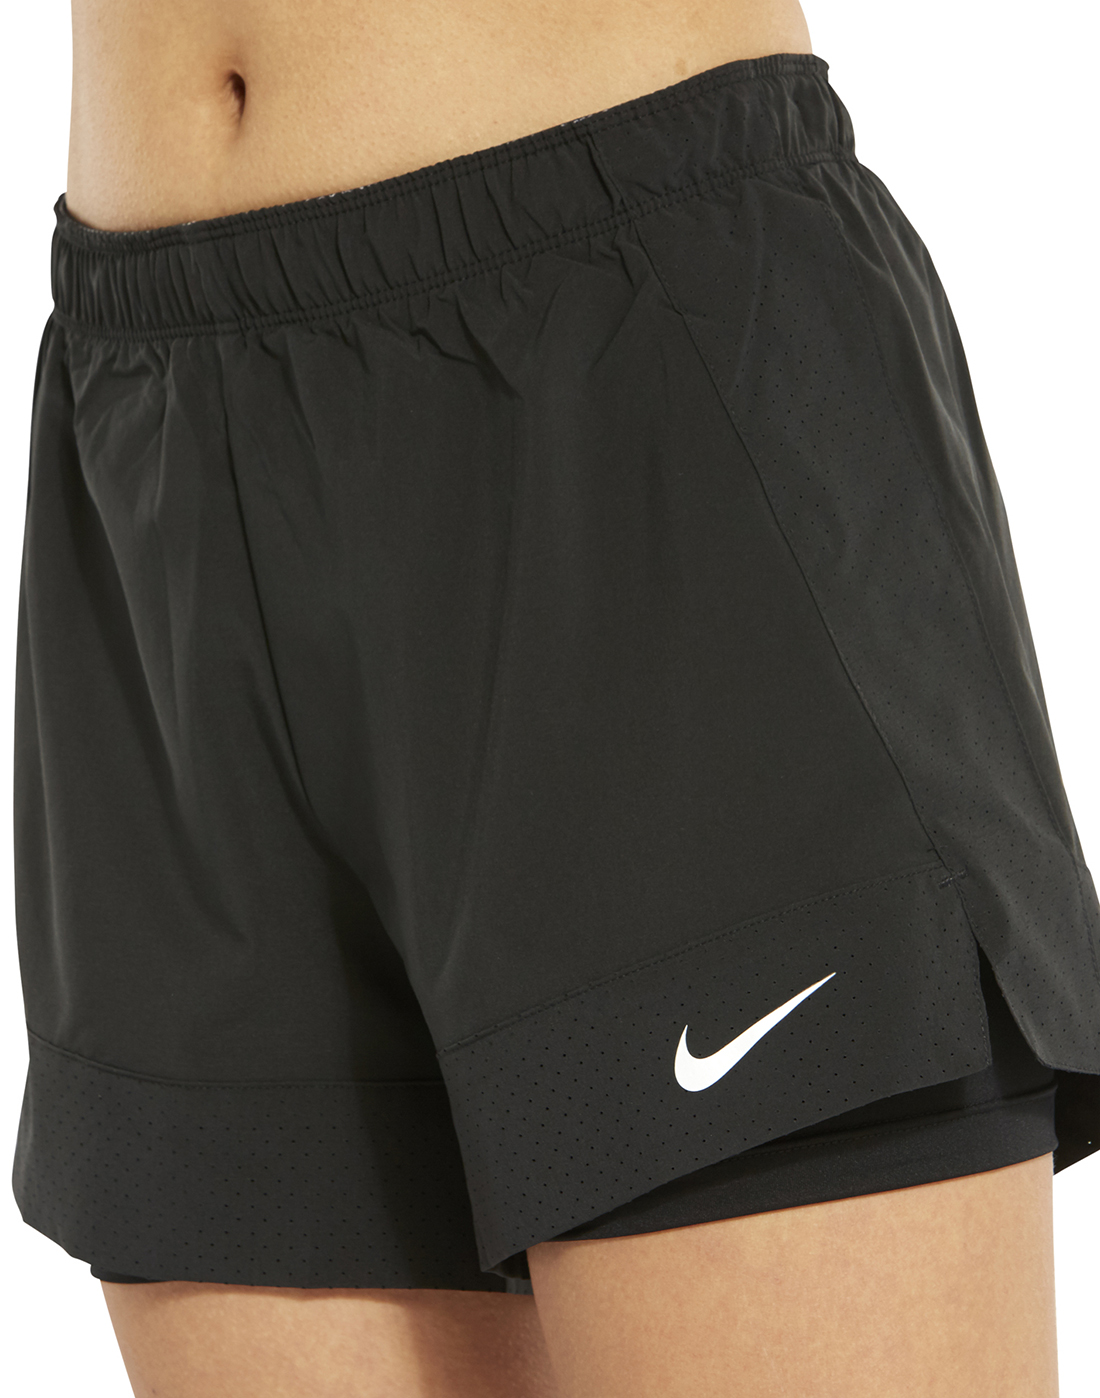 Download Nike Womens Flex 2 In 1 Shorts | Life Style Sports